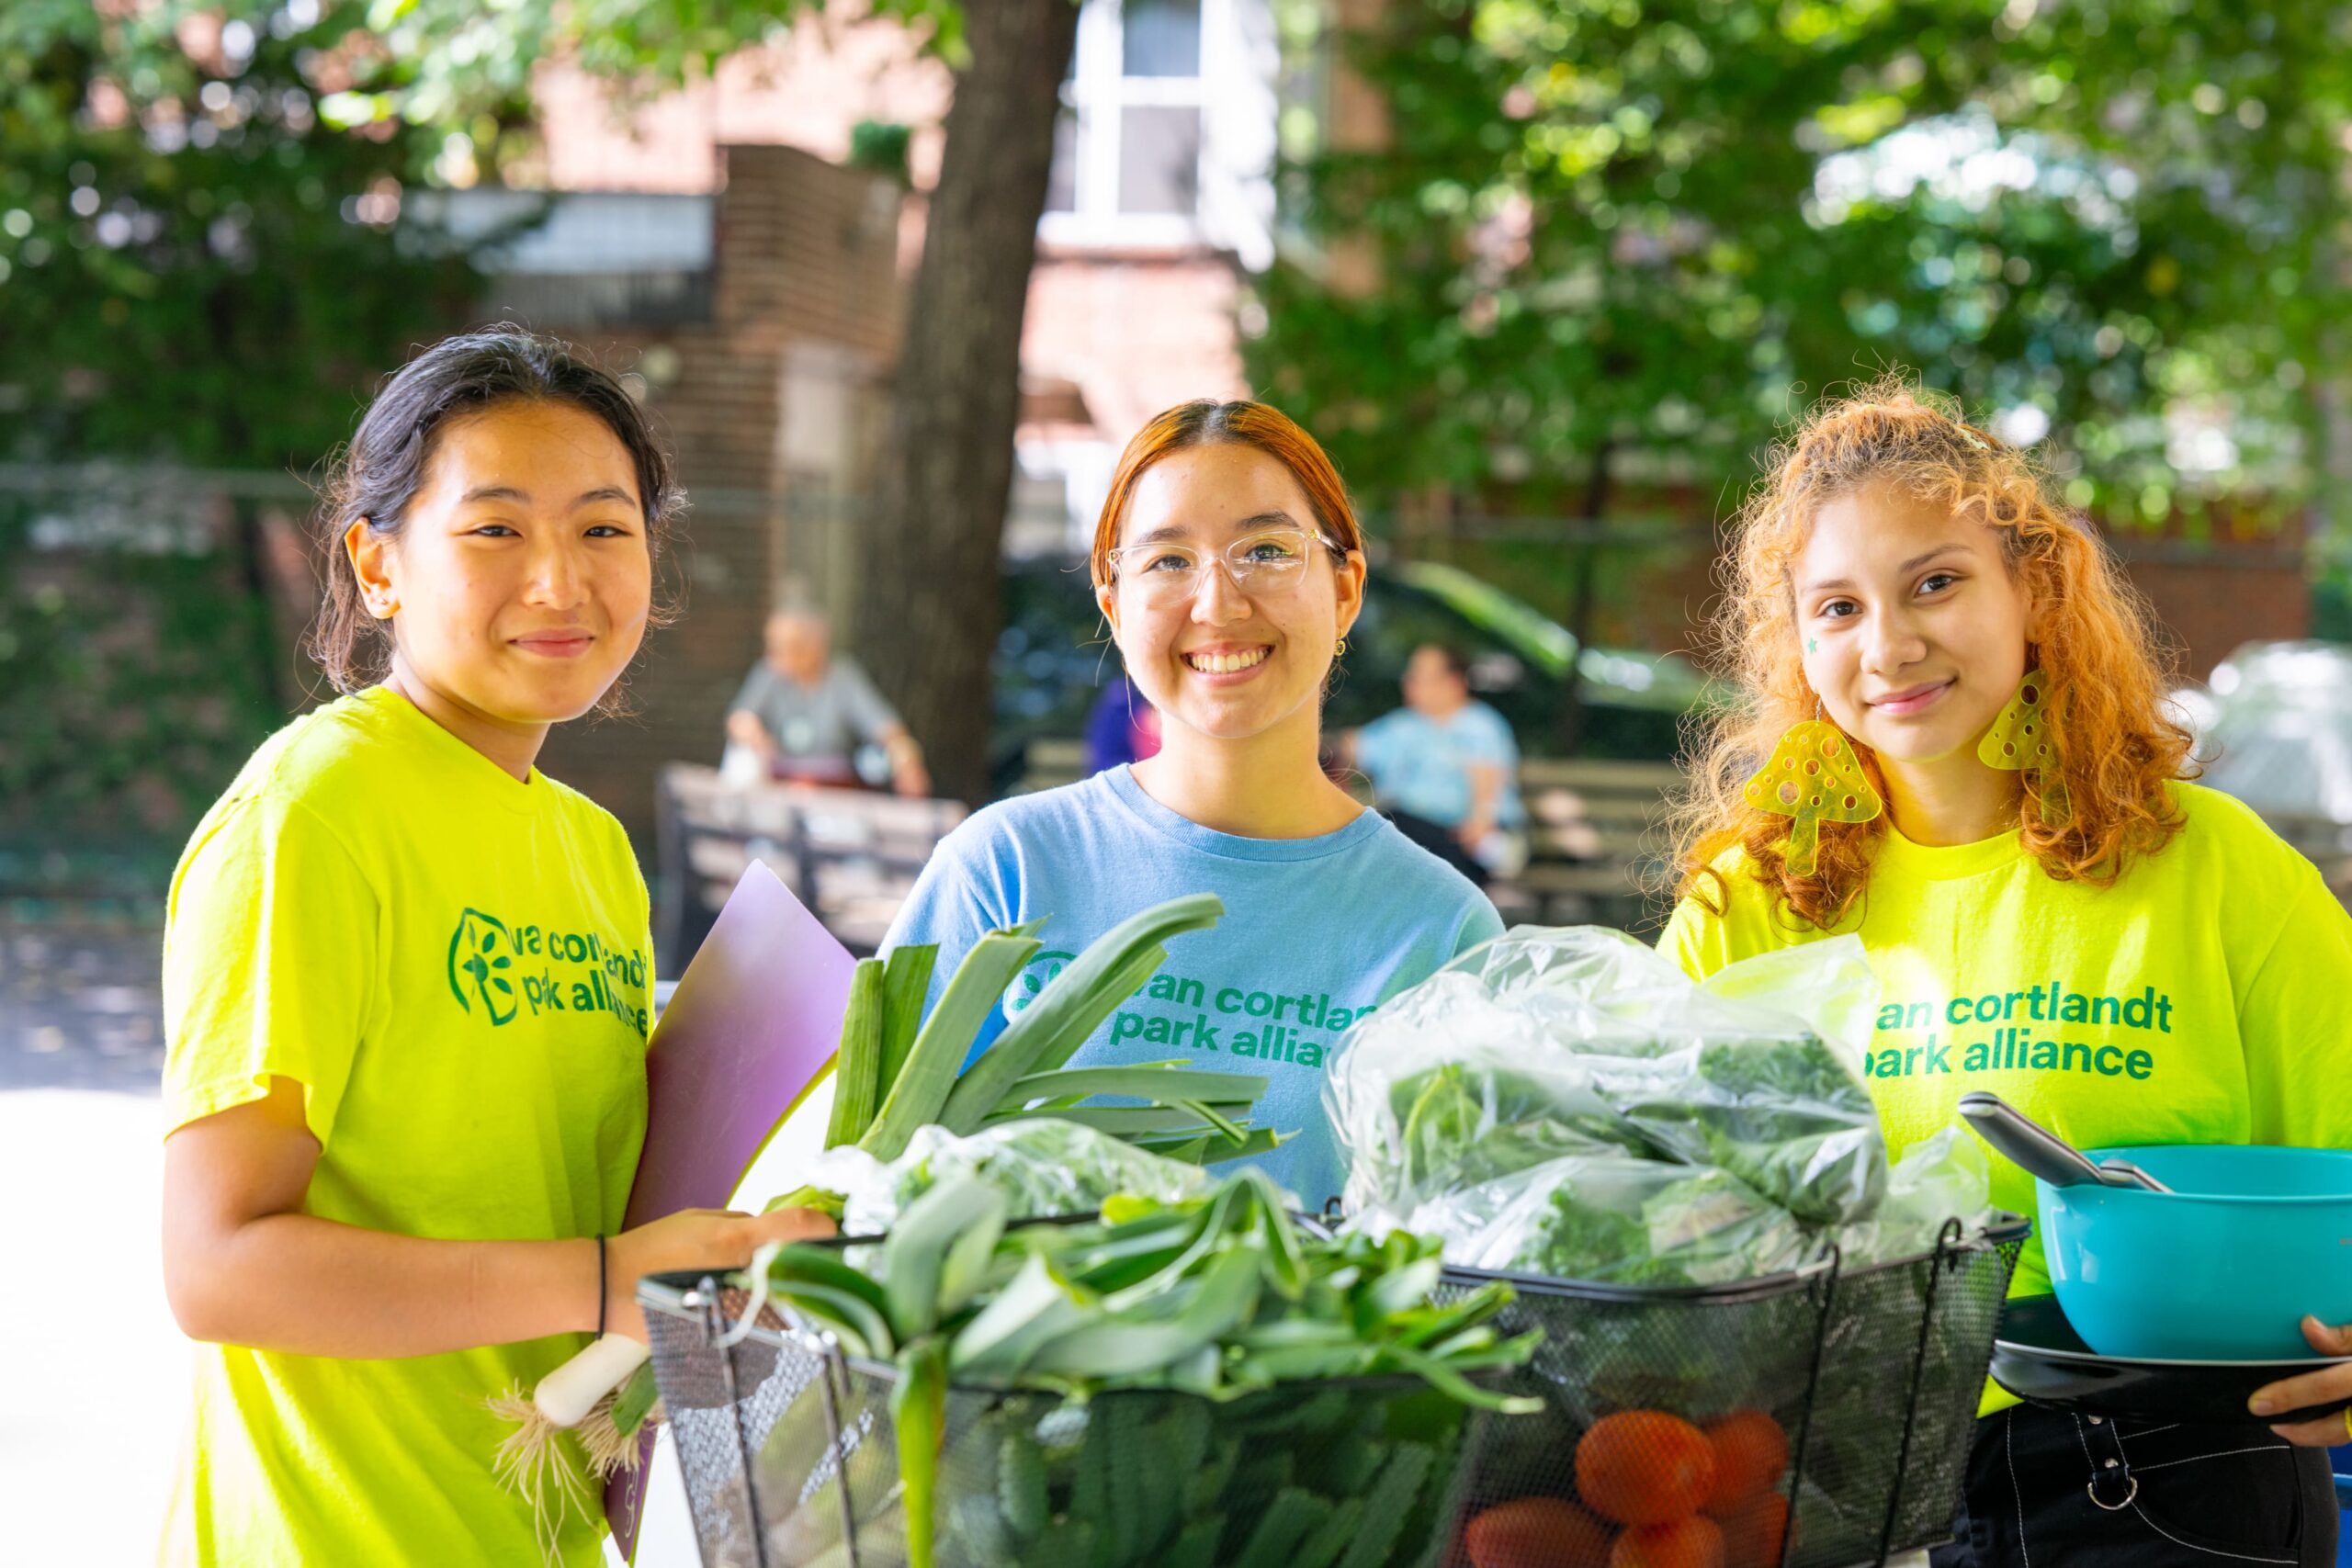 Three young women in yellow shirts standing next to a basket of vegetables.